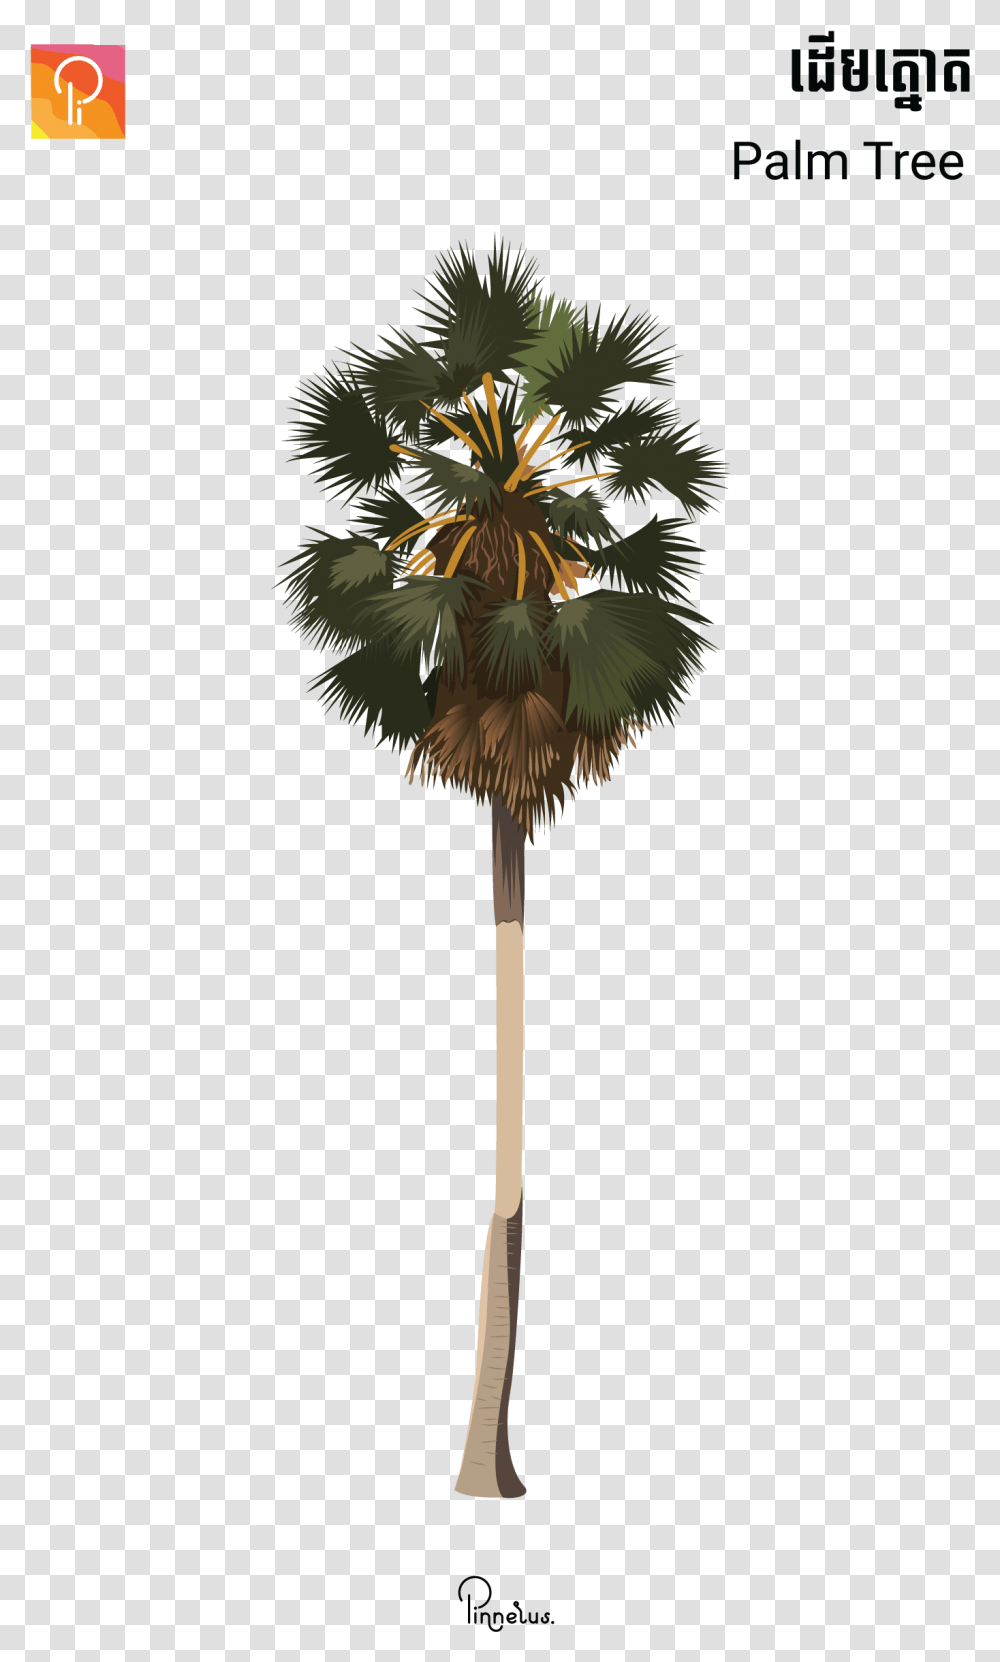 Palm Tree Vector Khmer Palm Tree, Lamp, Lampshade, Plant, Table Lamp Transparent Png